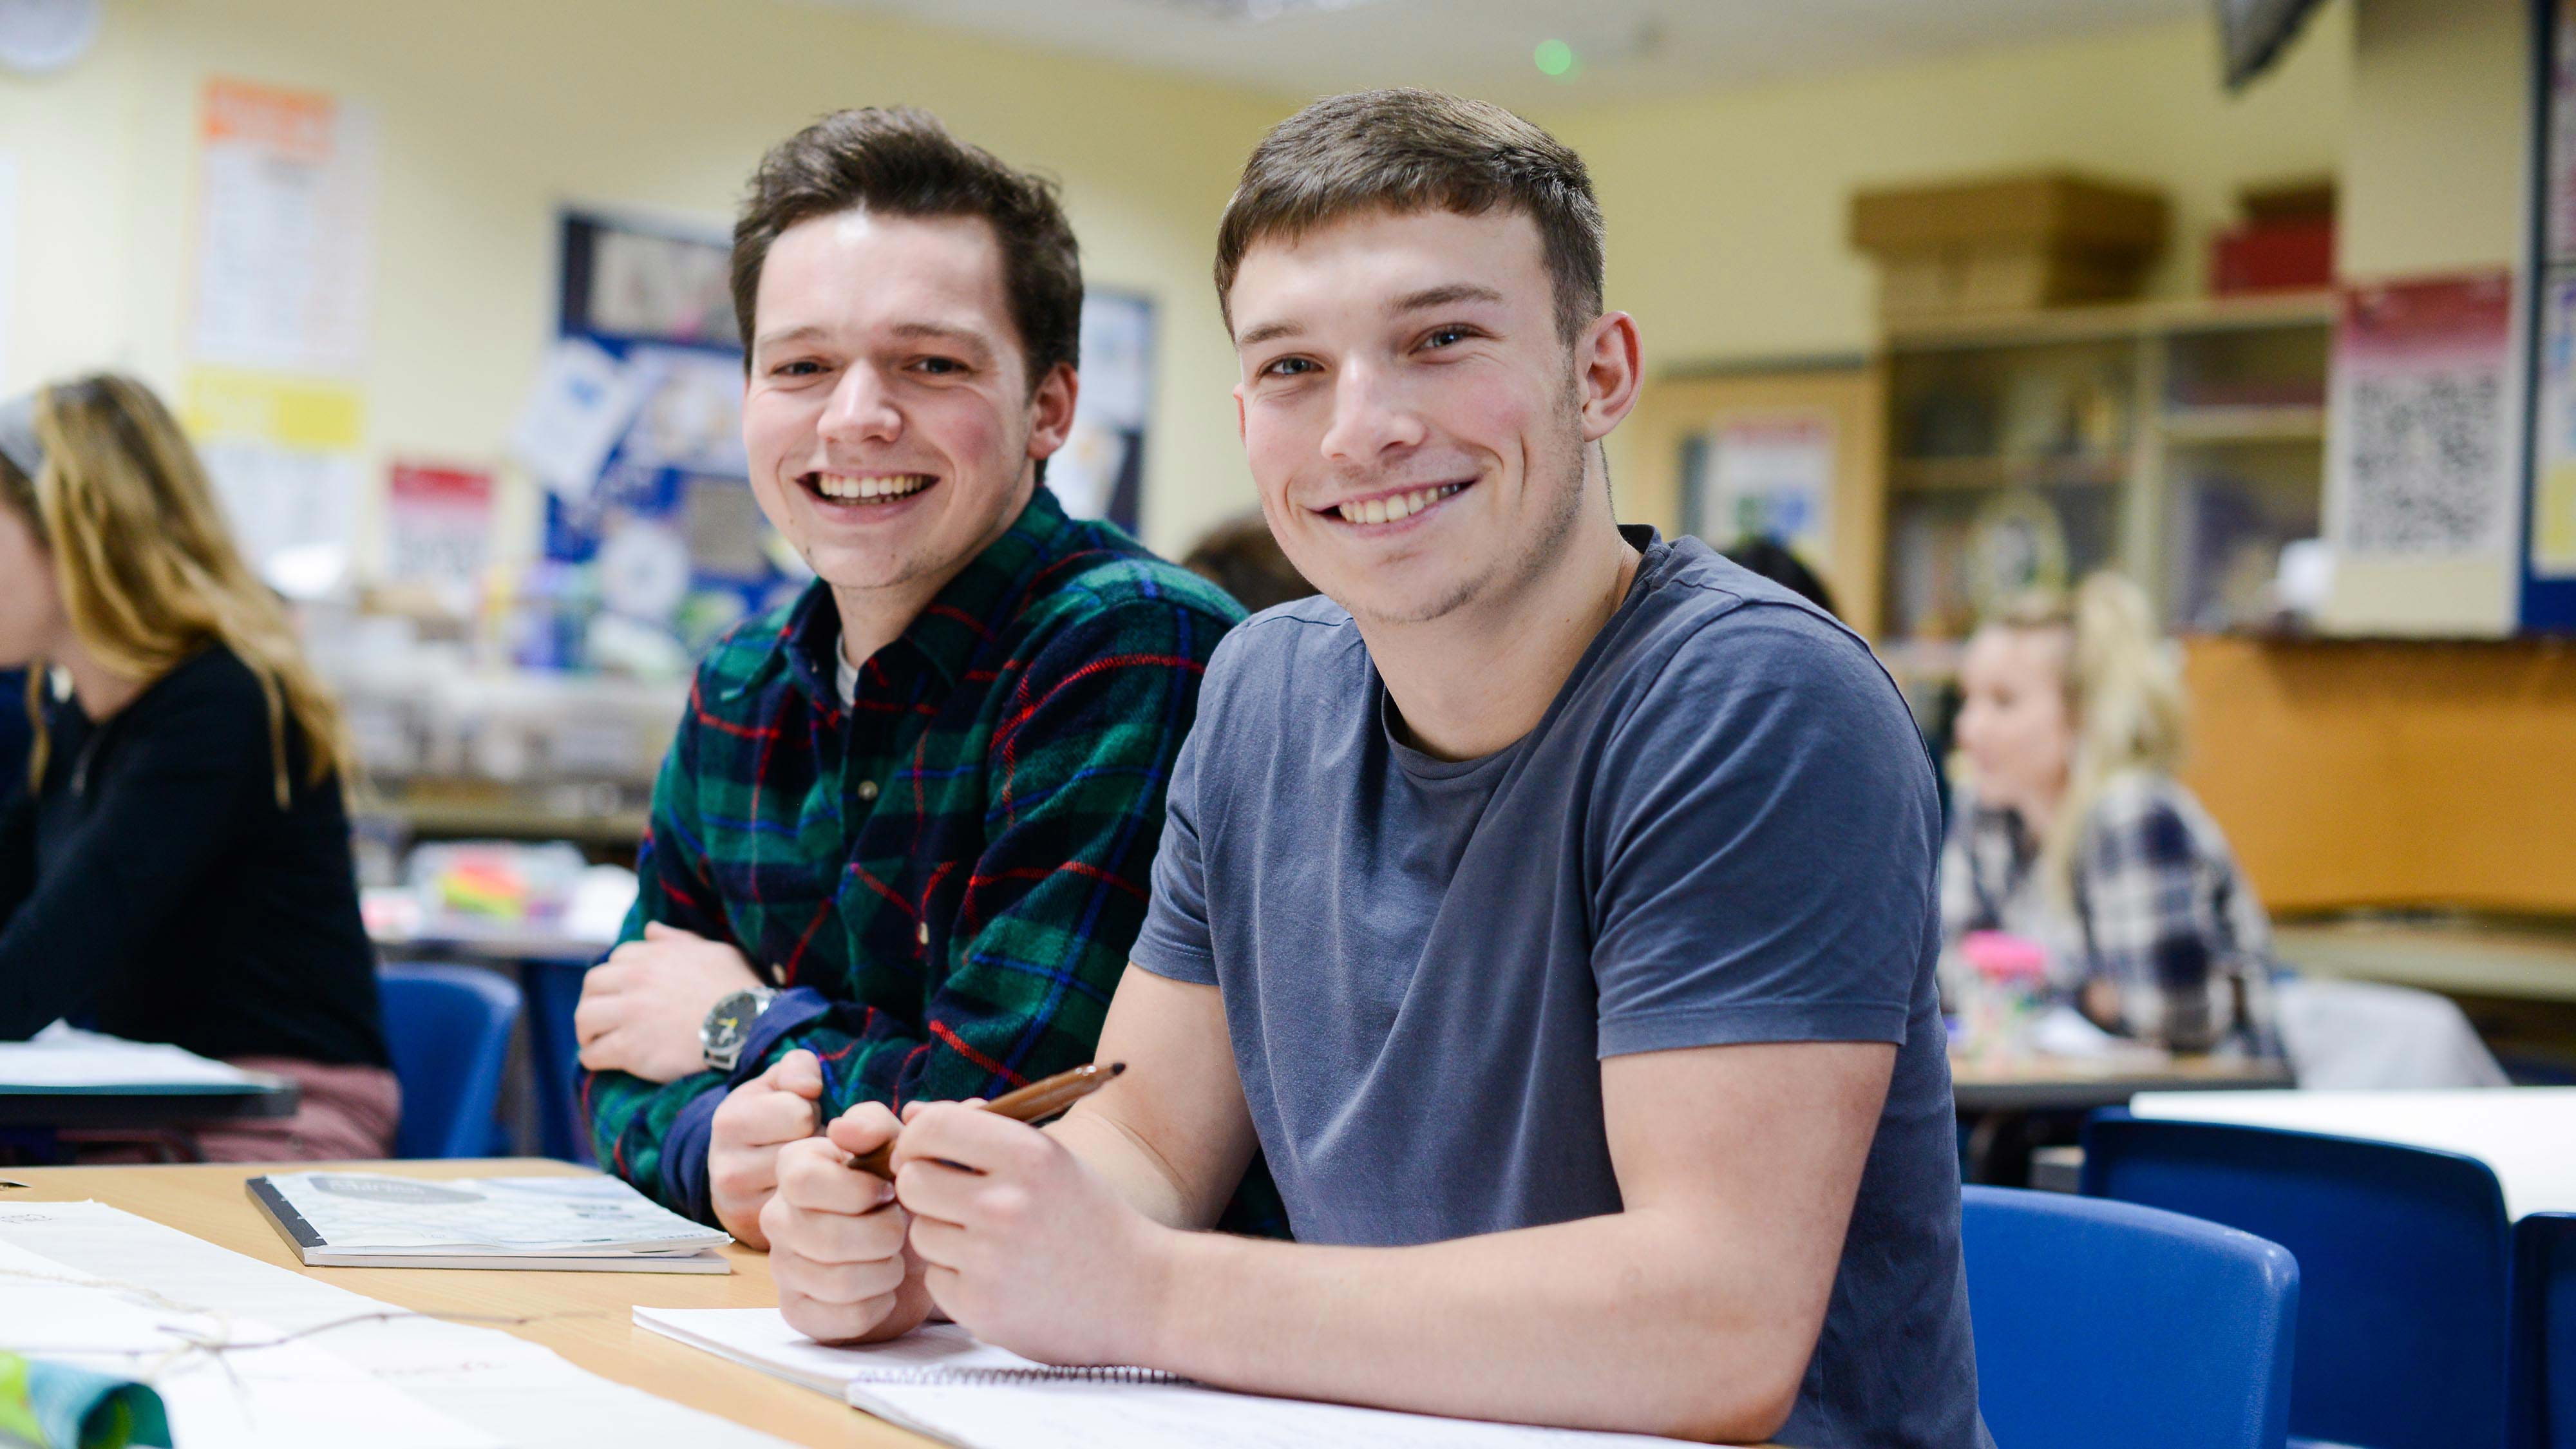 Two undergraduate students smiling directly at the camera